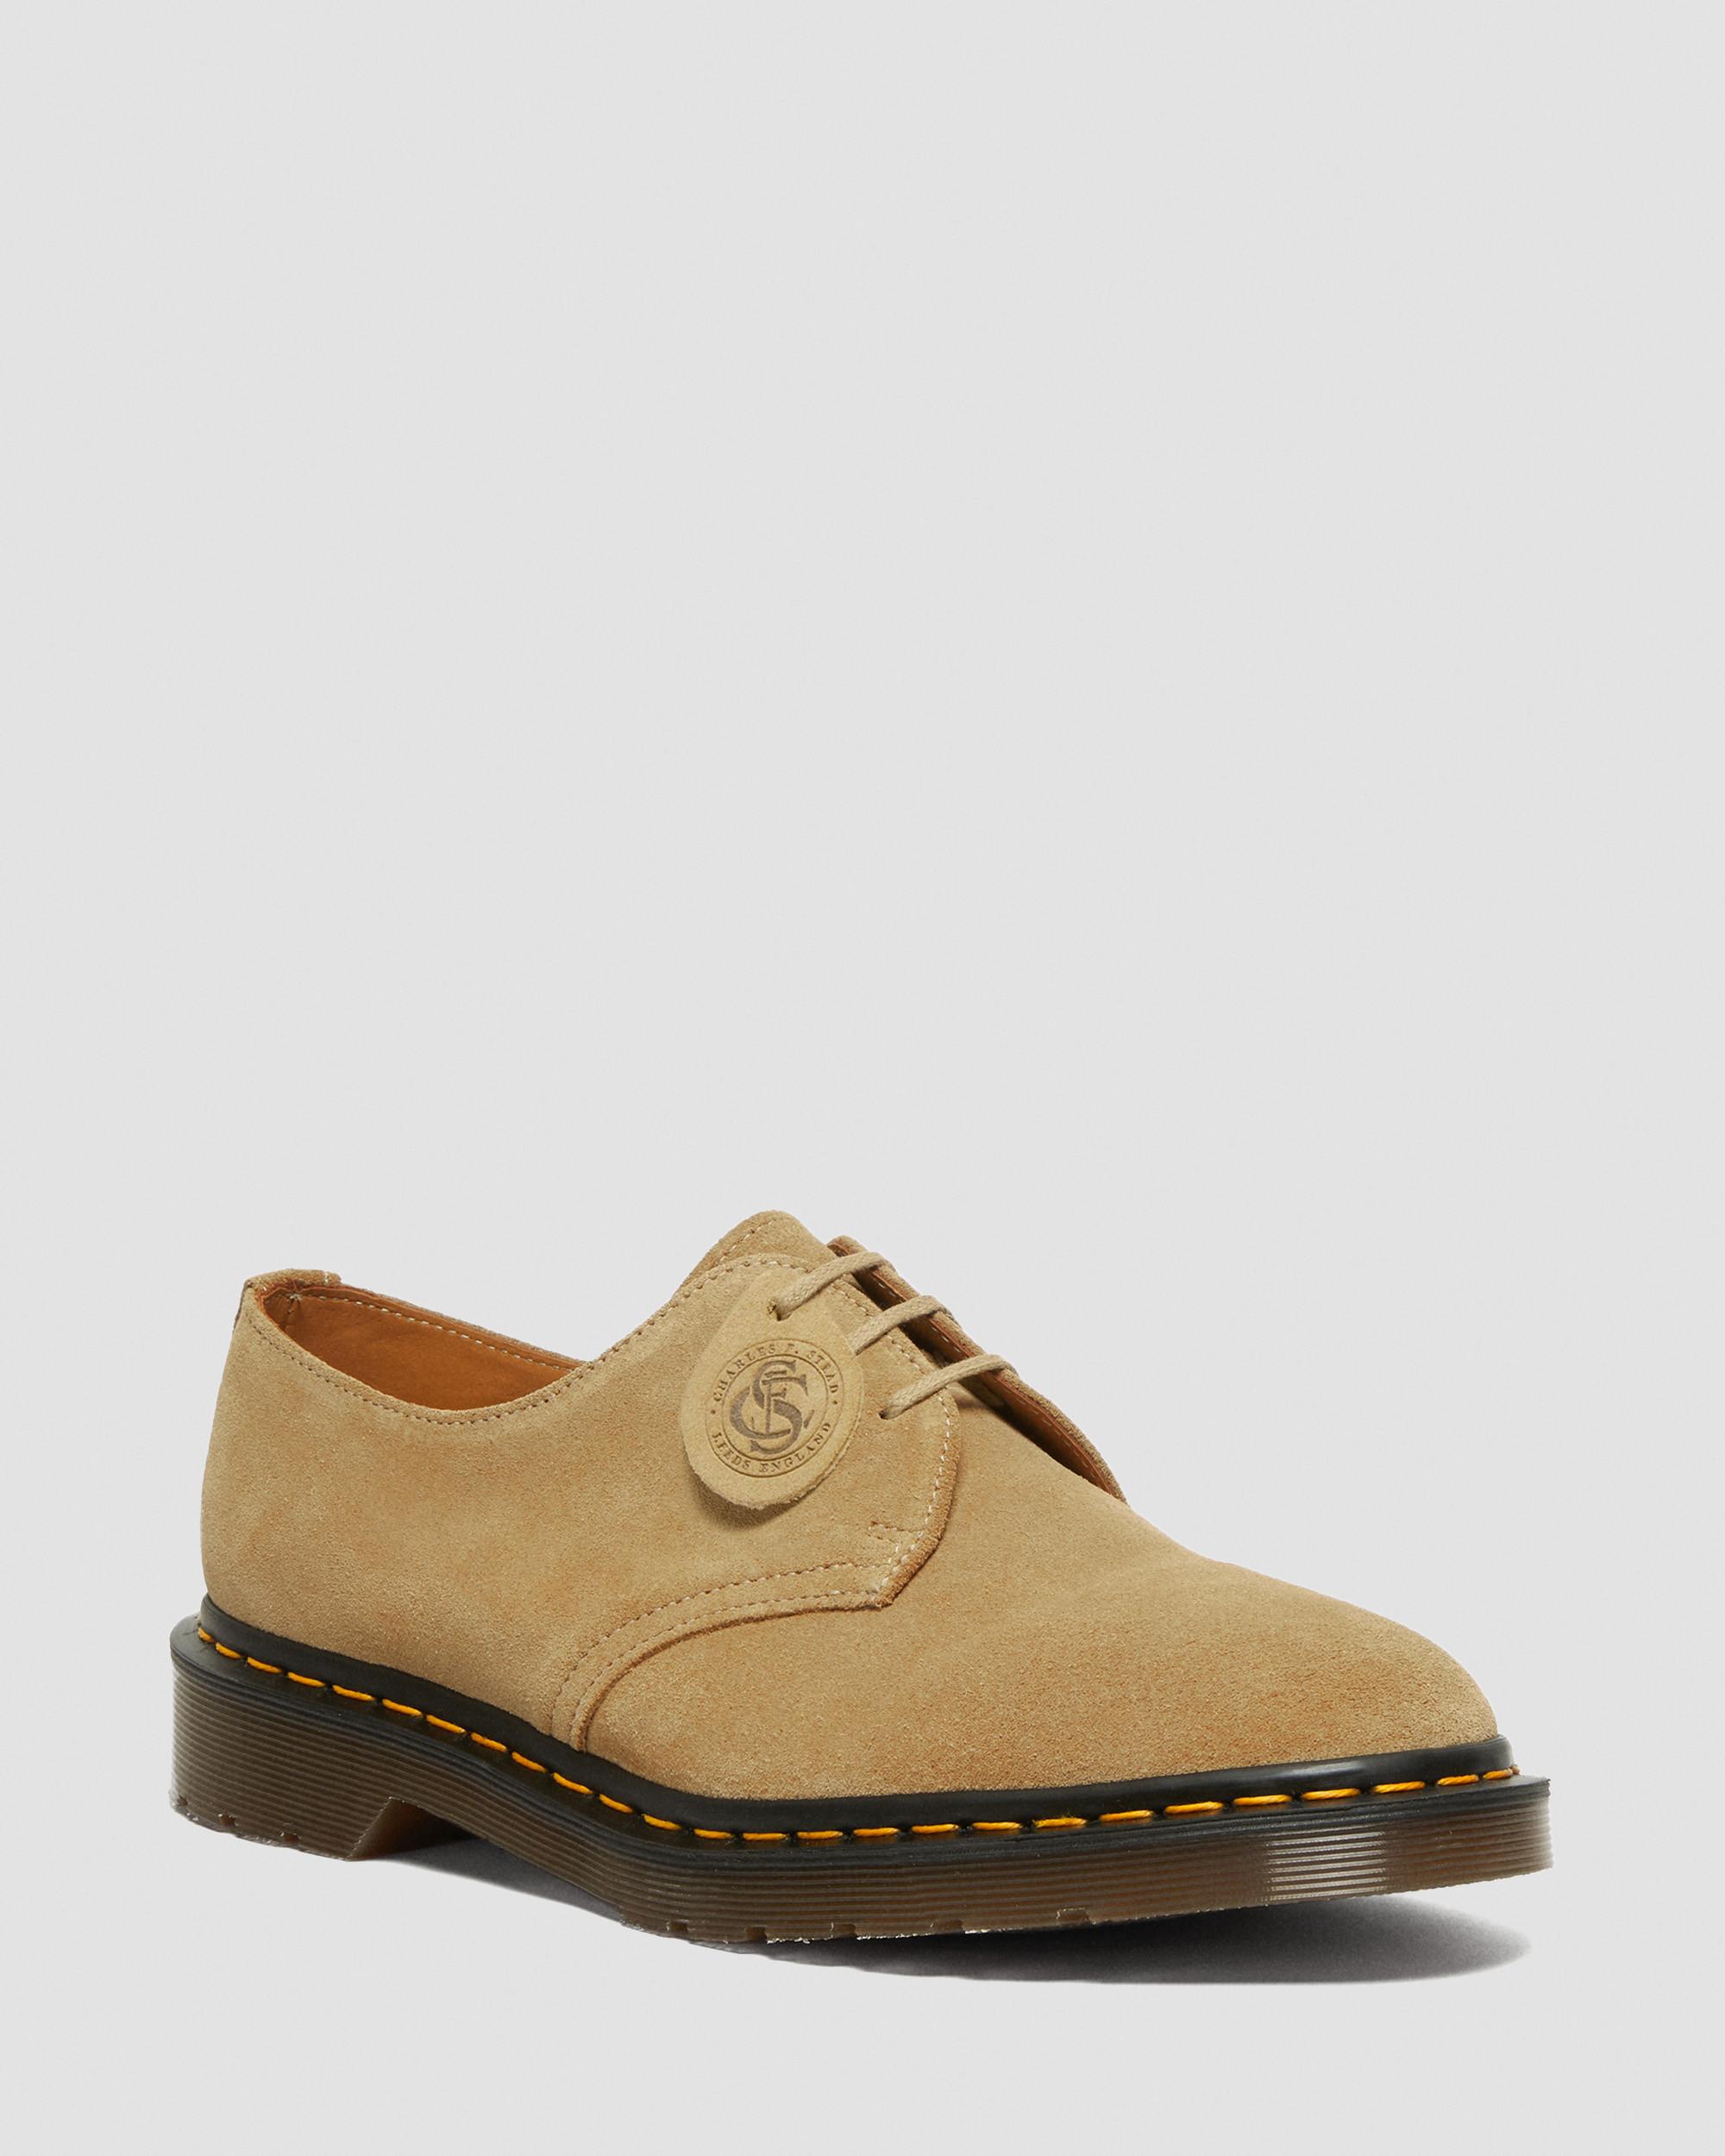 1461 Made in England Buck Suede Oxford Shoes